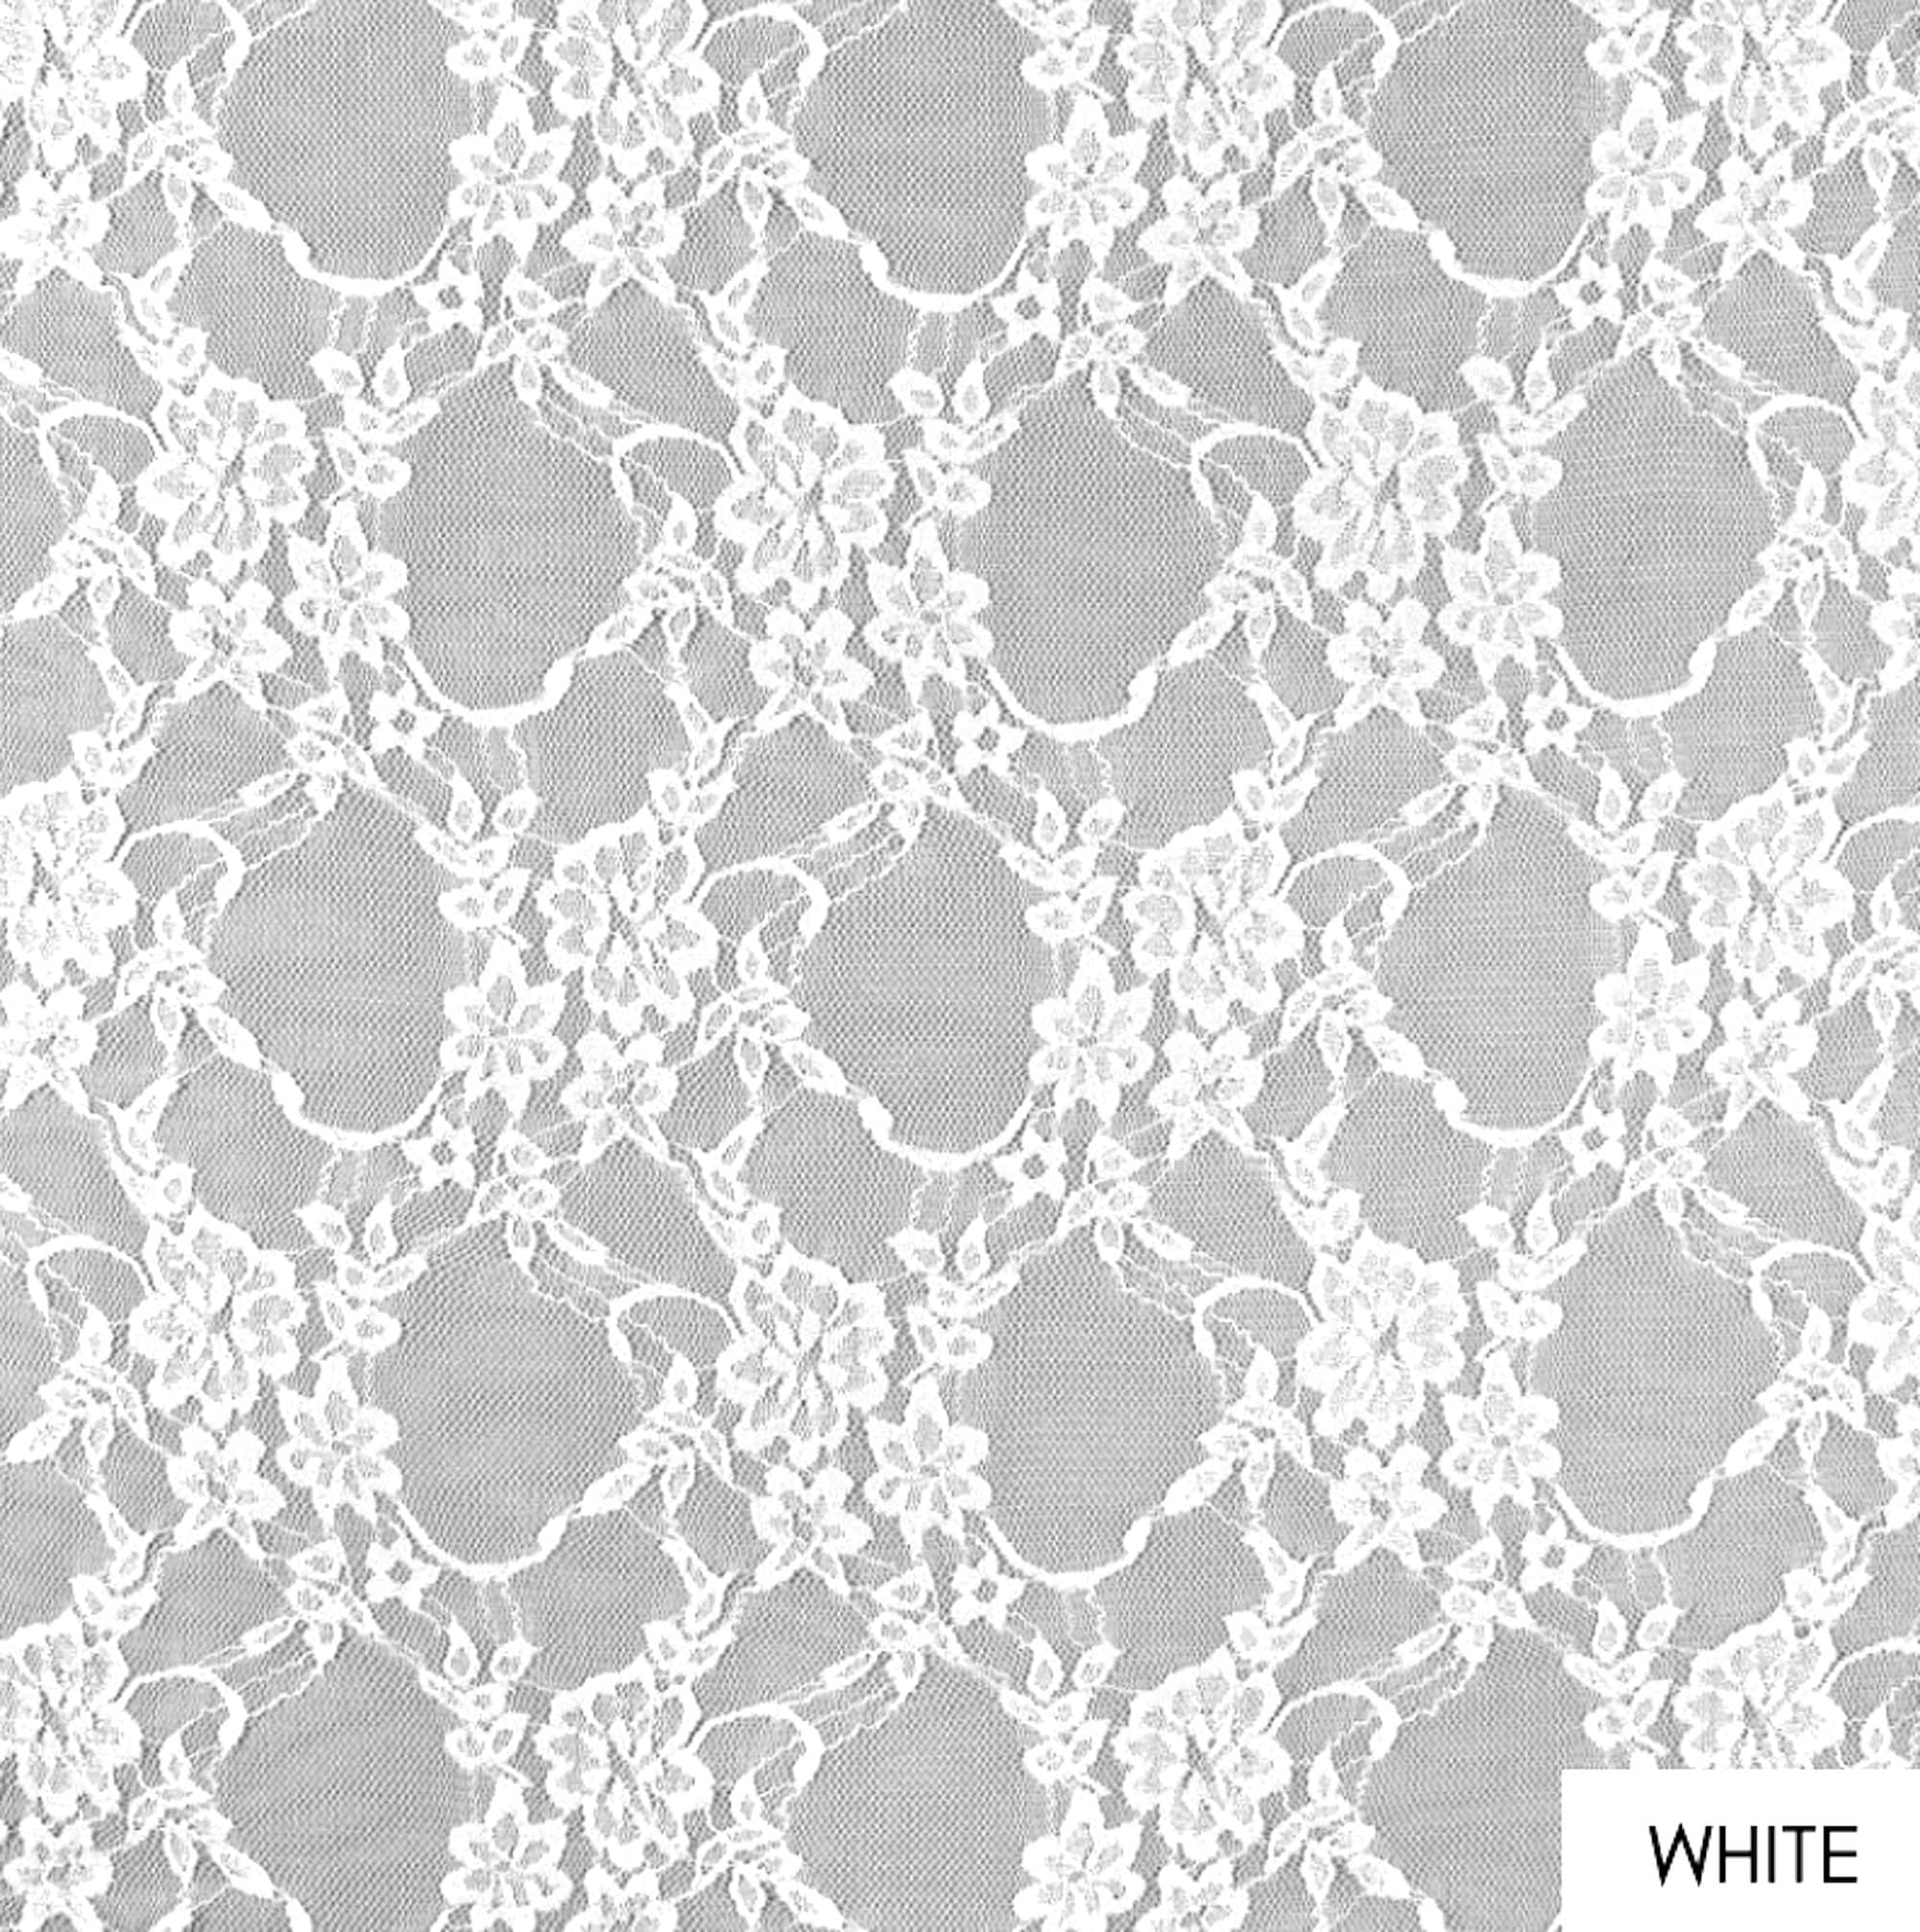 Stretch Lace, Fabric by the Yard, Ivory Lace, Polyester, Romantic Lace,  Wedding, Wedding Dress, Yardage, Yard, Floral Fabric, Vintage, Dress -   Canada